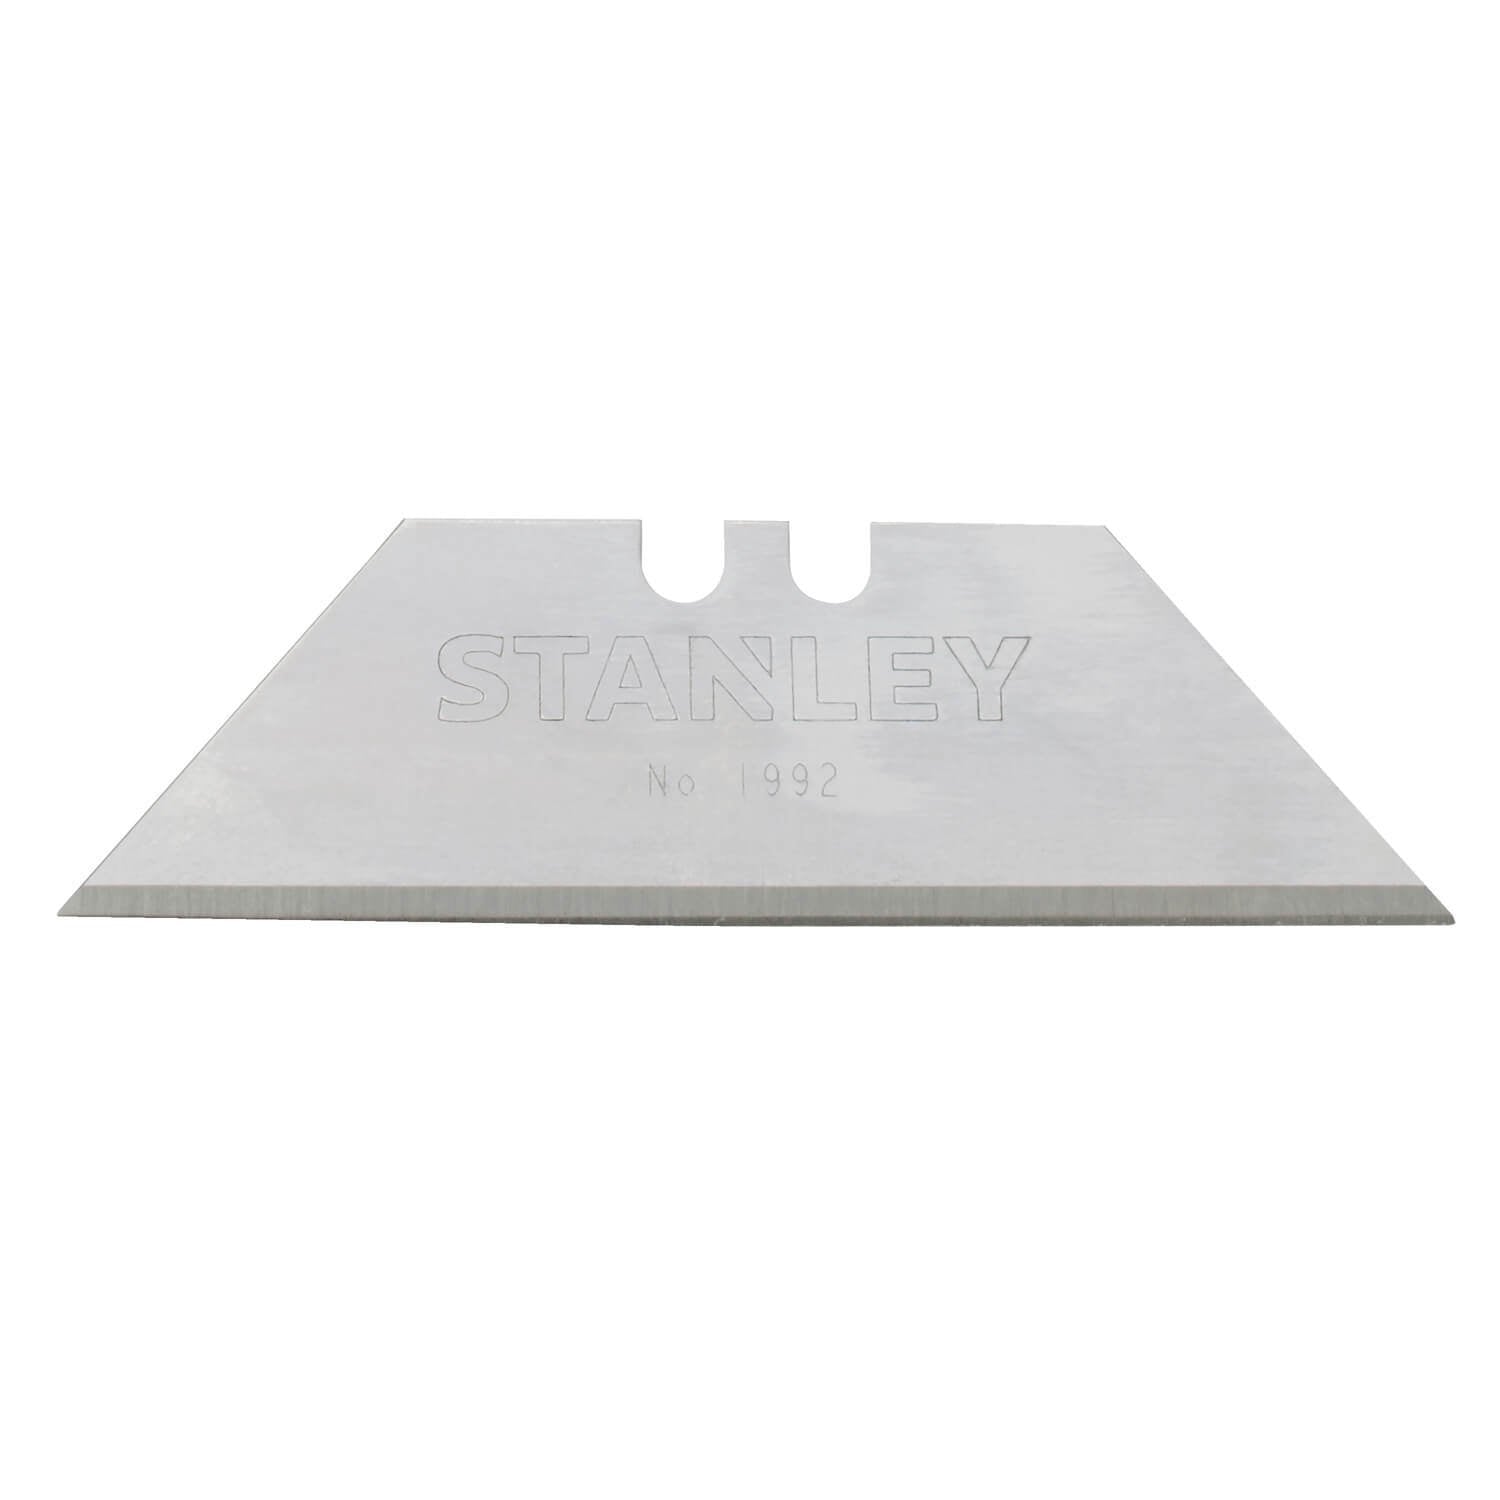 STANLEY   11-921A   -  100-PACK 1992® HEAVY-DUTY UTILITY BLADES WITH DISPENSER